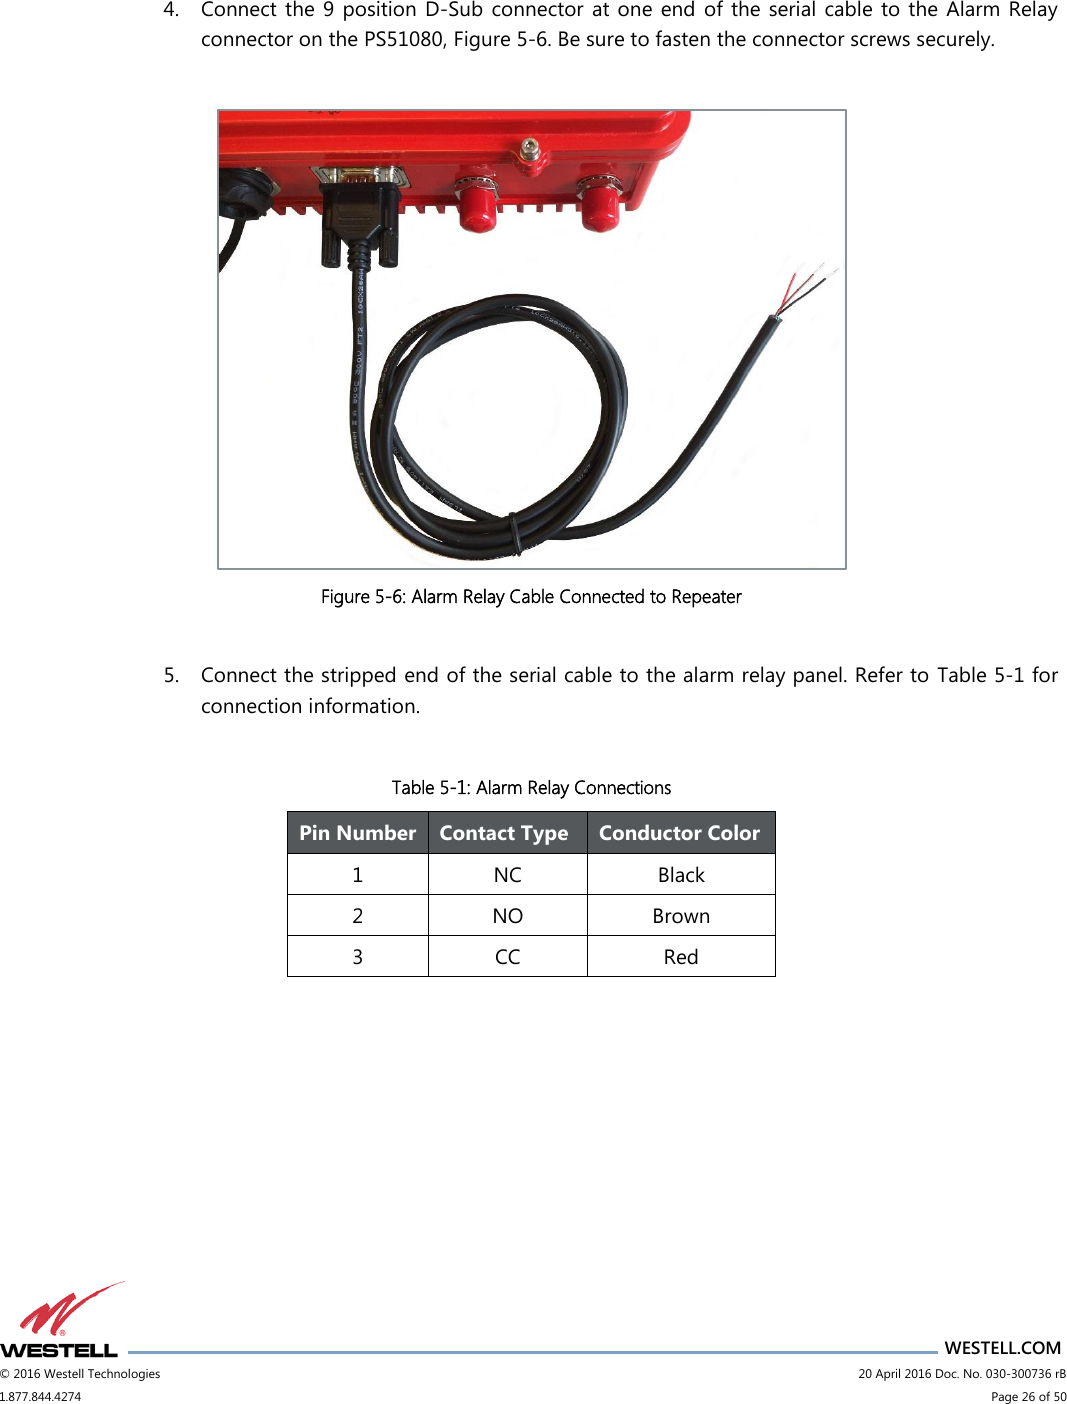                      WESTELL.COM © 2016 Westell Technologies                             20 April 2016 Doc. No. 030-300736 rB 1.877.844.4274                             Page 26 of 50   4. Connect the 9 position D-Sub  connector  at one end of the serial cable to the Alarm Relay connector on the PS51080, Figure 5-6. Be sure to fasten the connector screws securely.   Figure 5-6: Alarm Relay Cable Connected to Repeater  5. Connect the stripped end of the serial cable to the alarm relay panel. Refer to  Table 5-1 for connection information.  Table 5-1: Alarm Relay Connections        Pin Number Contact Type Conductor Color 1 NC Black 2 NO Brown 3 CC Red 